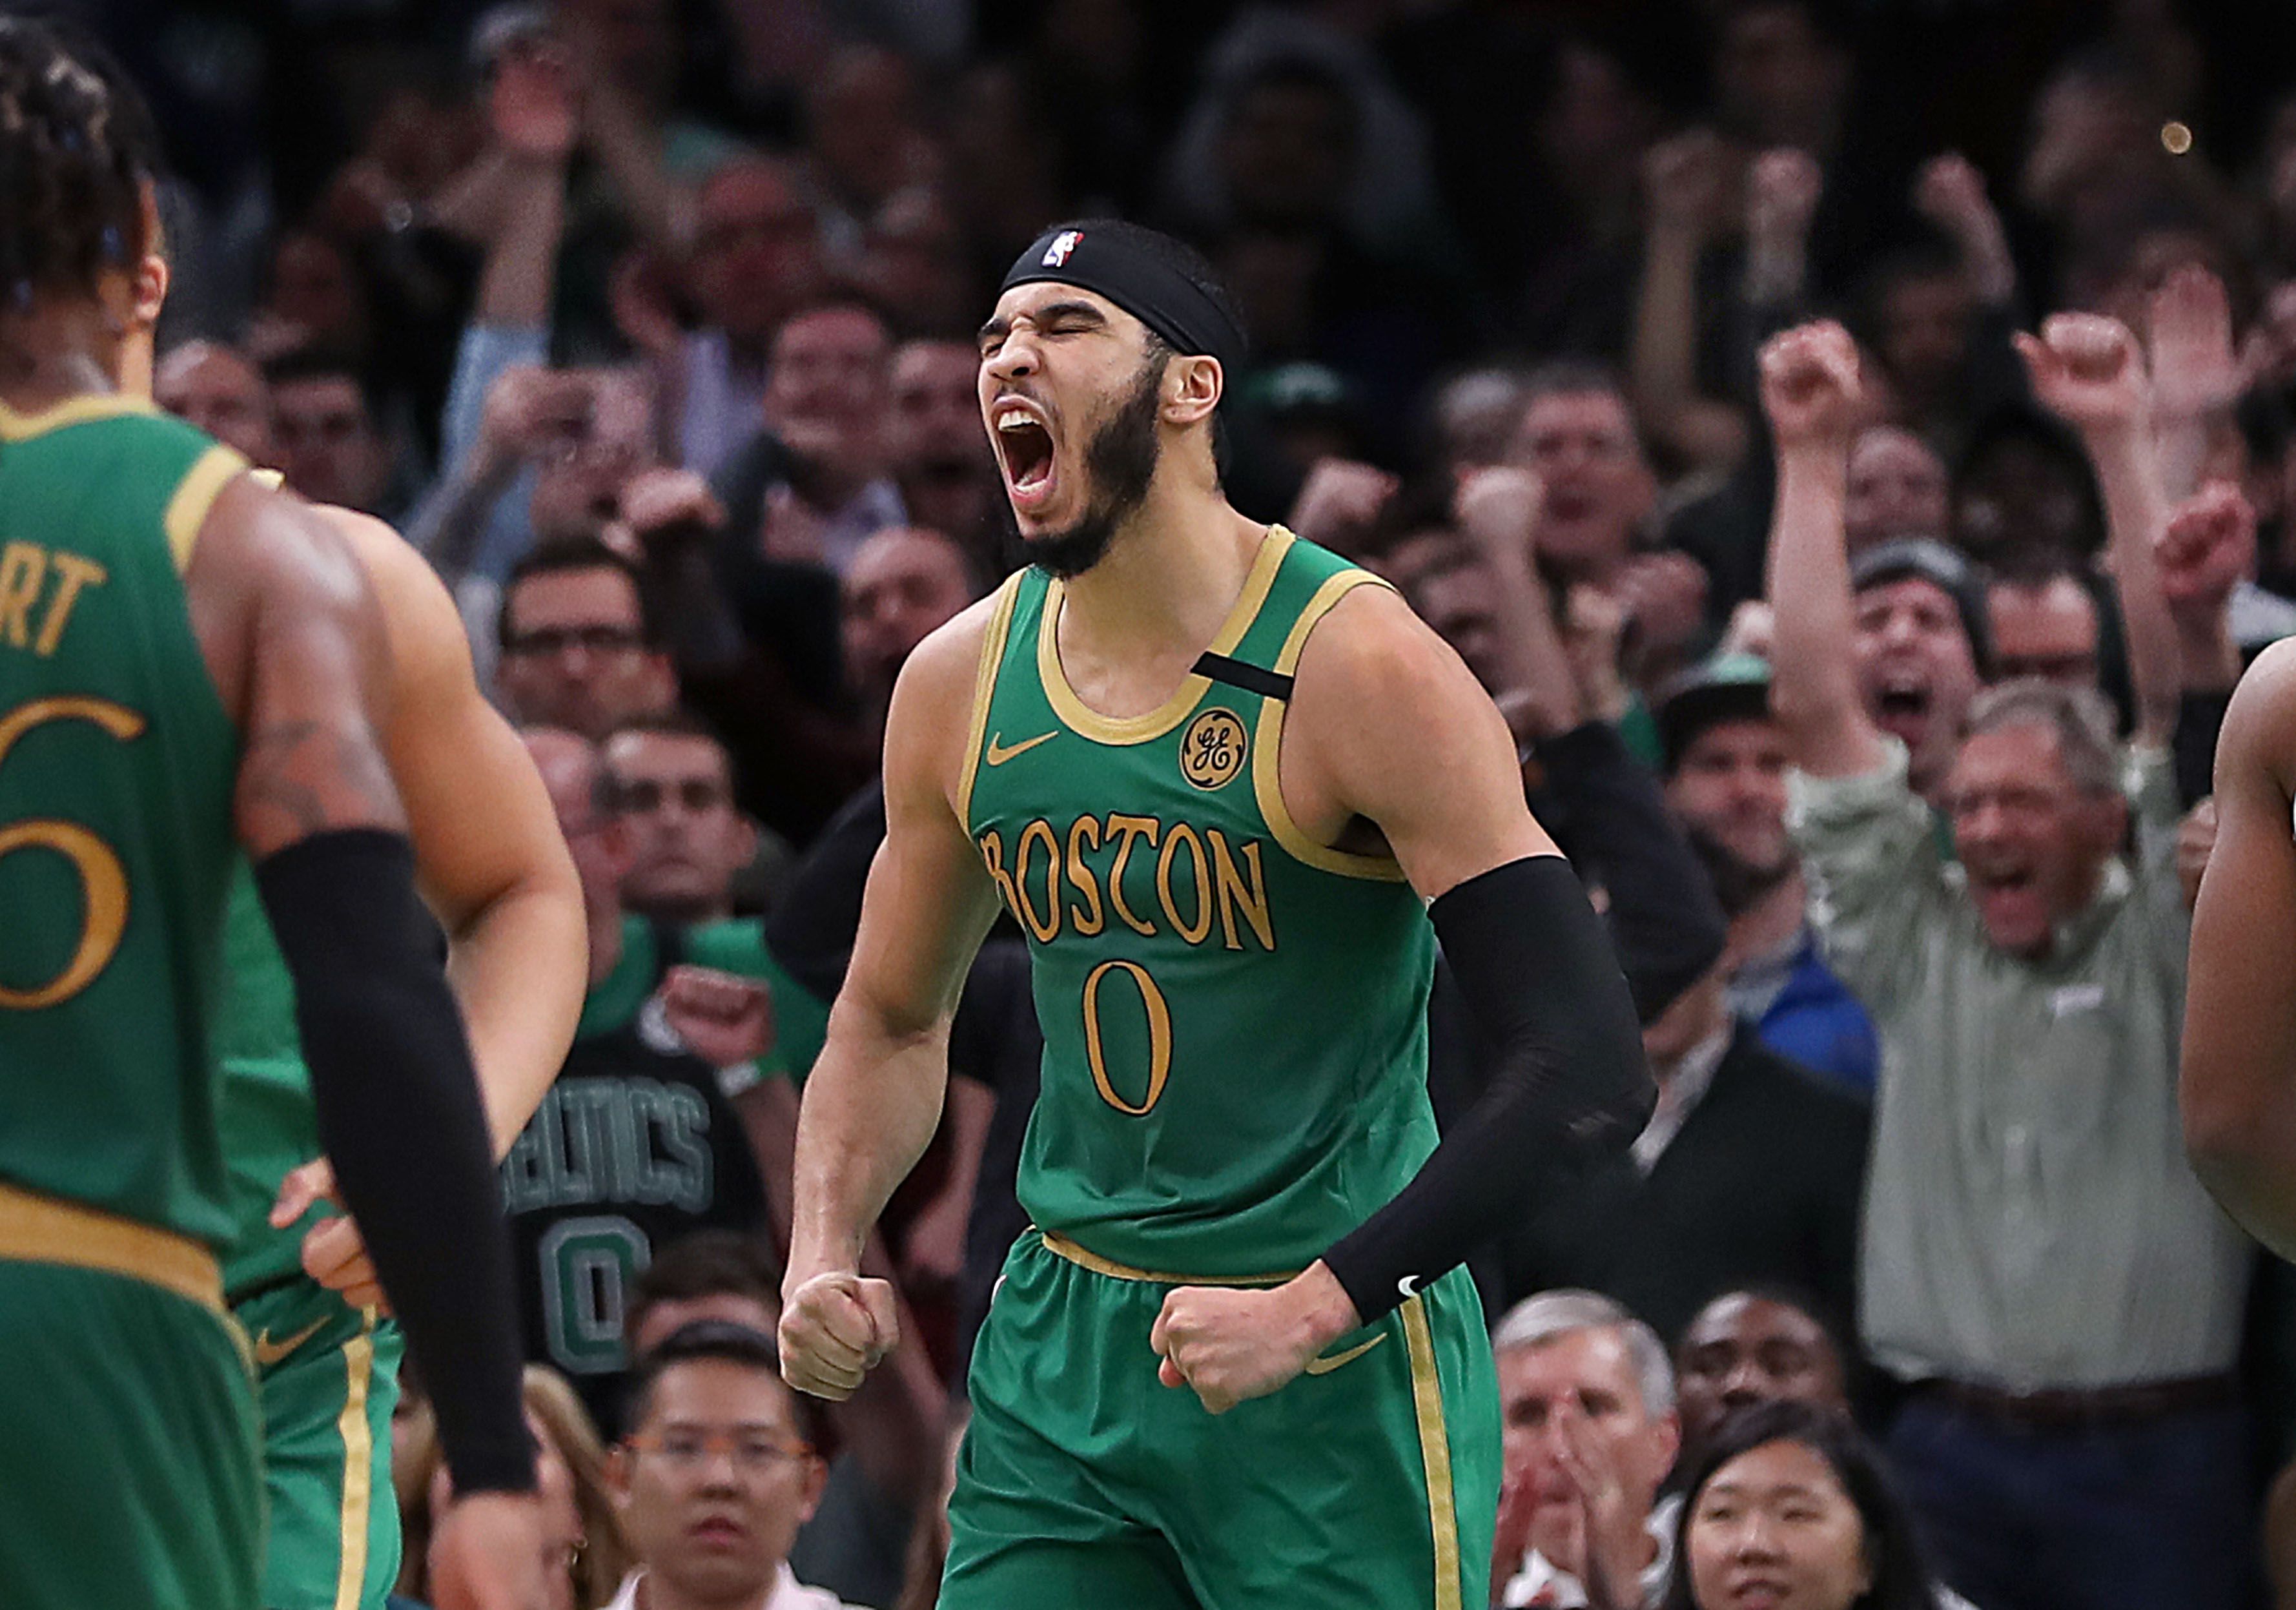 Jayson Tatum and Jaylen Brown punish Pelicans, and they are becoming the  most dominant duo in the NBA - The Boston Globe